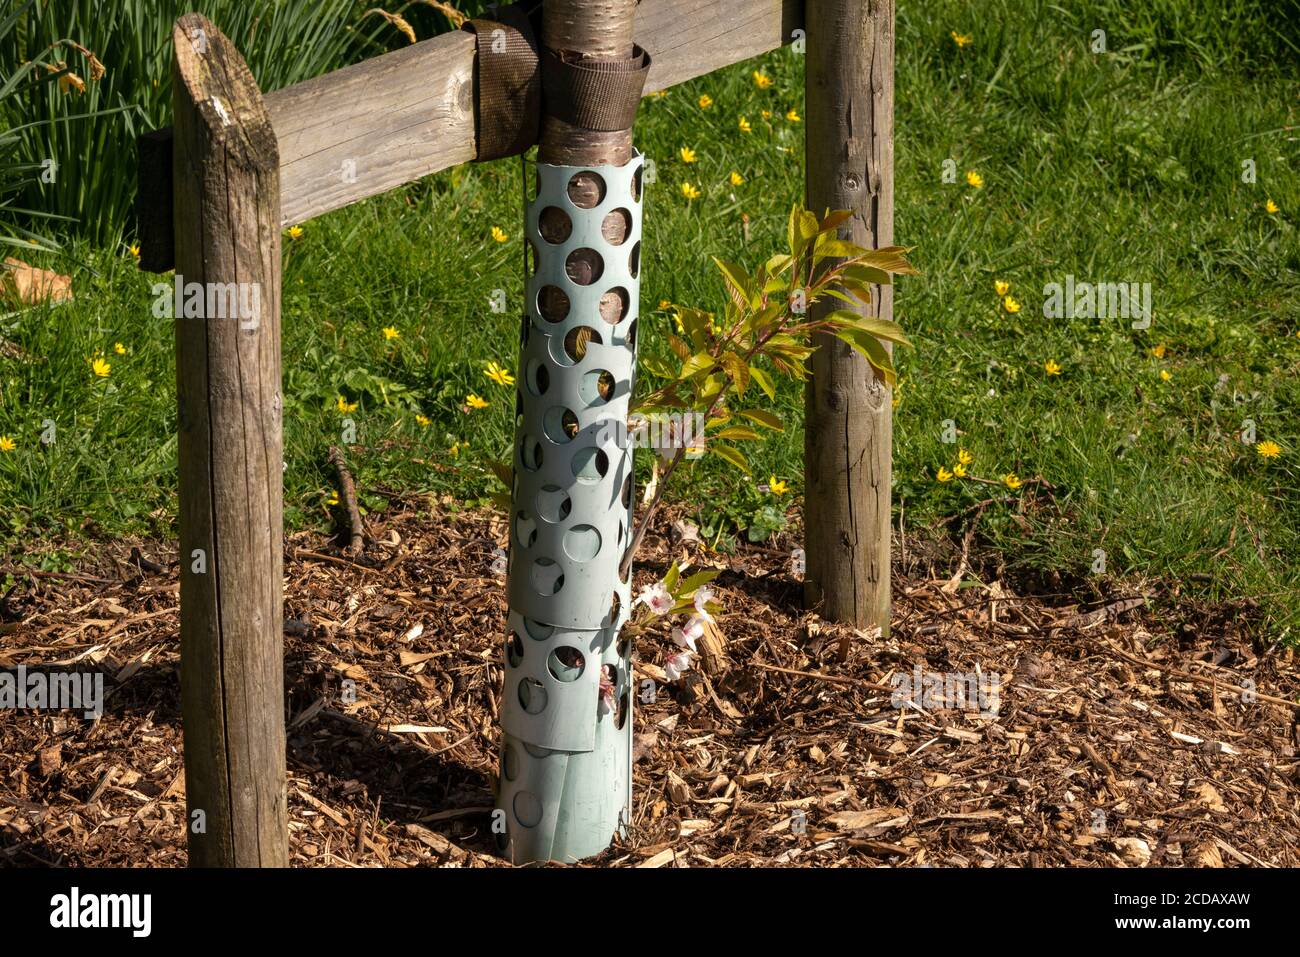 Young cherry tree leaves or shoots in springtime growing through metal mesh protection tube afforestation Ireland Stock Photo